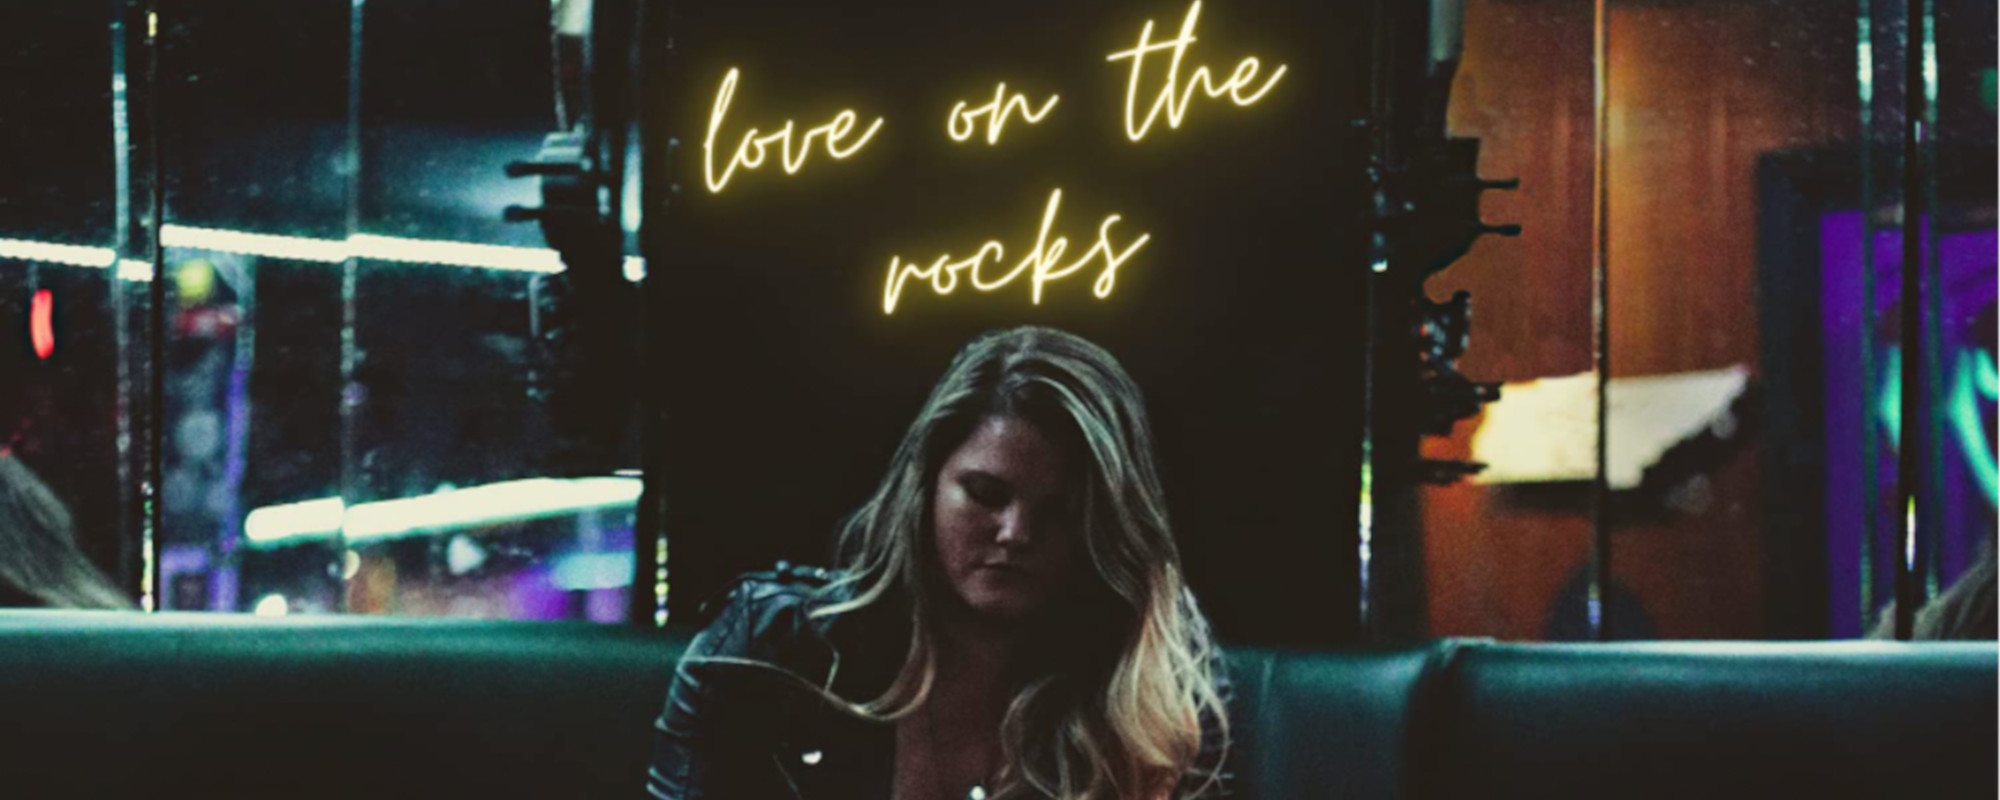 Review: Roots Singer Lauren Anderson Belts Out Blues Rock with a  Potent Presence and  Powerhouse Voice